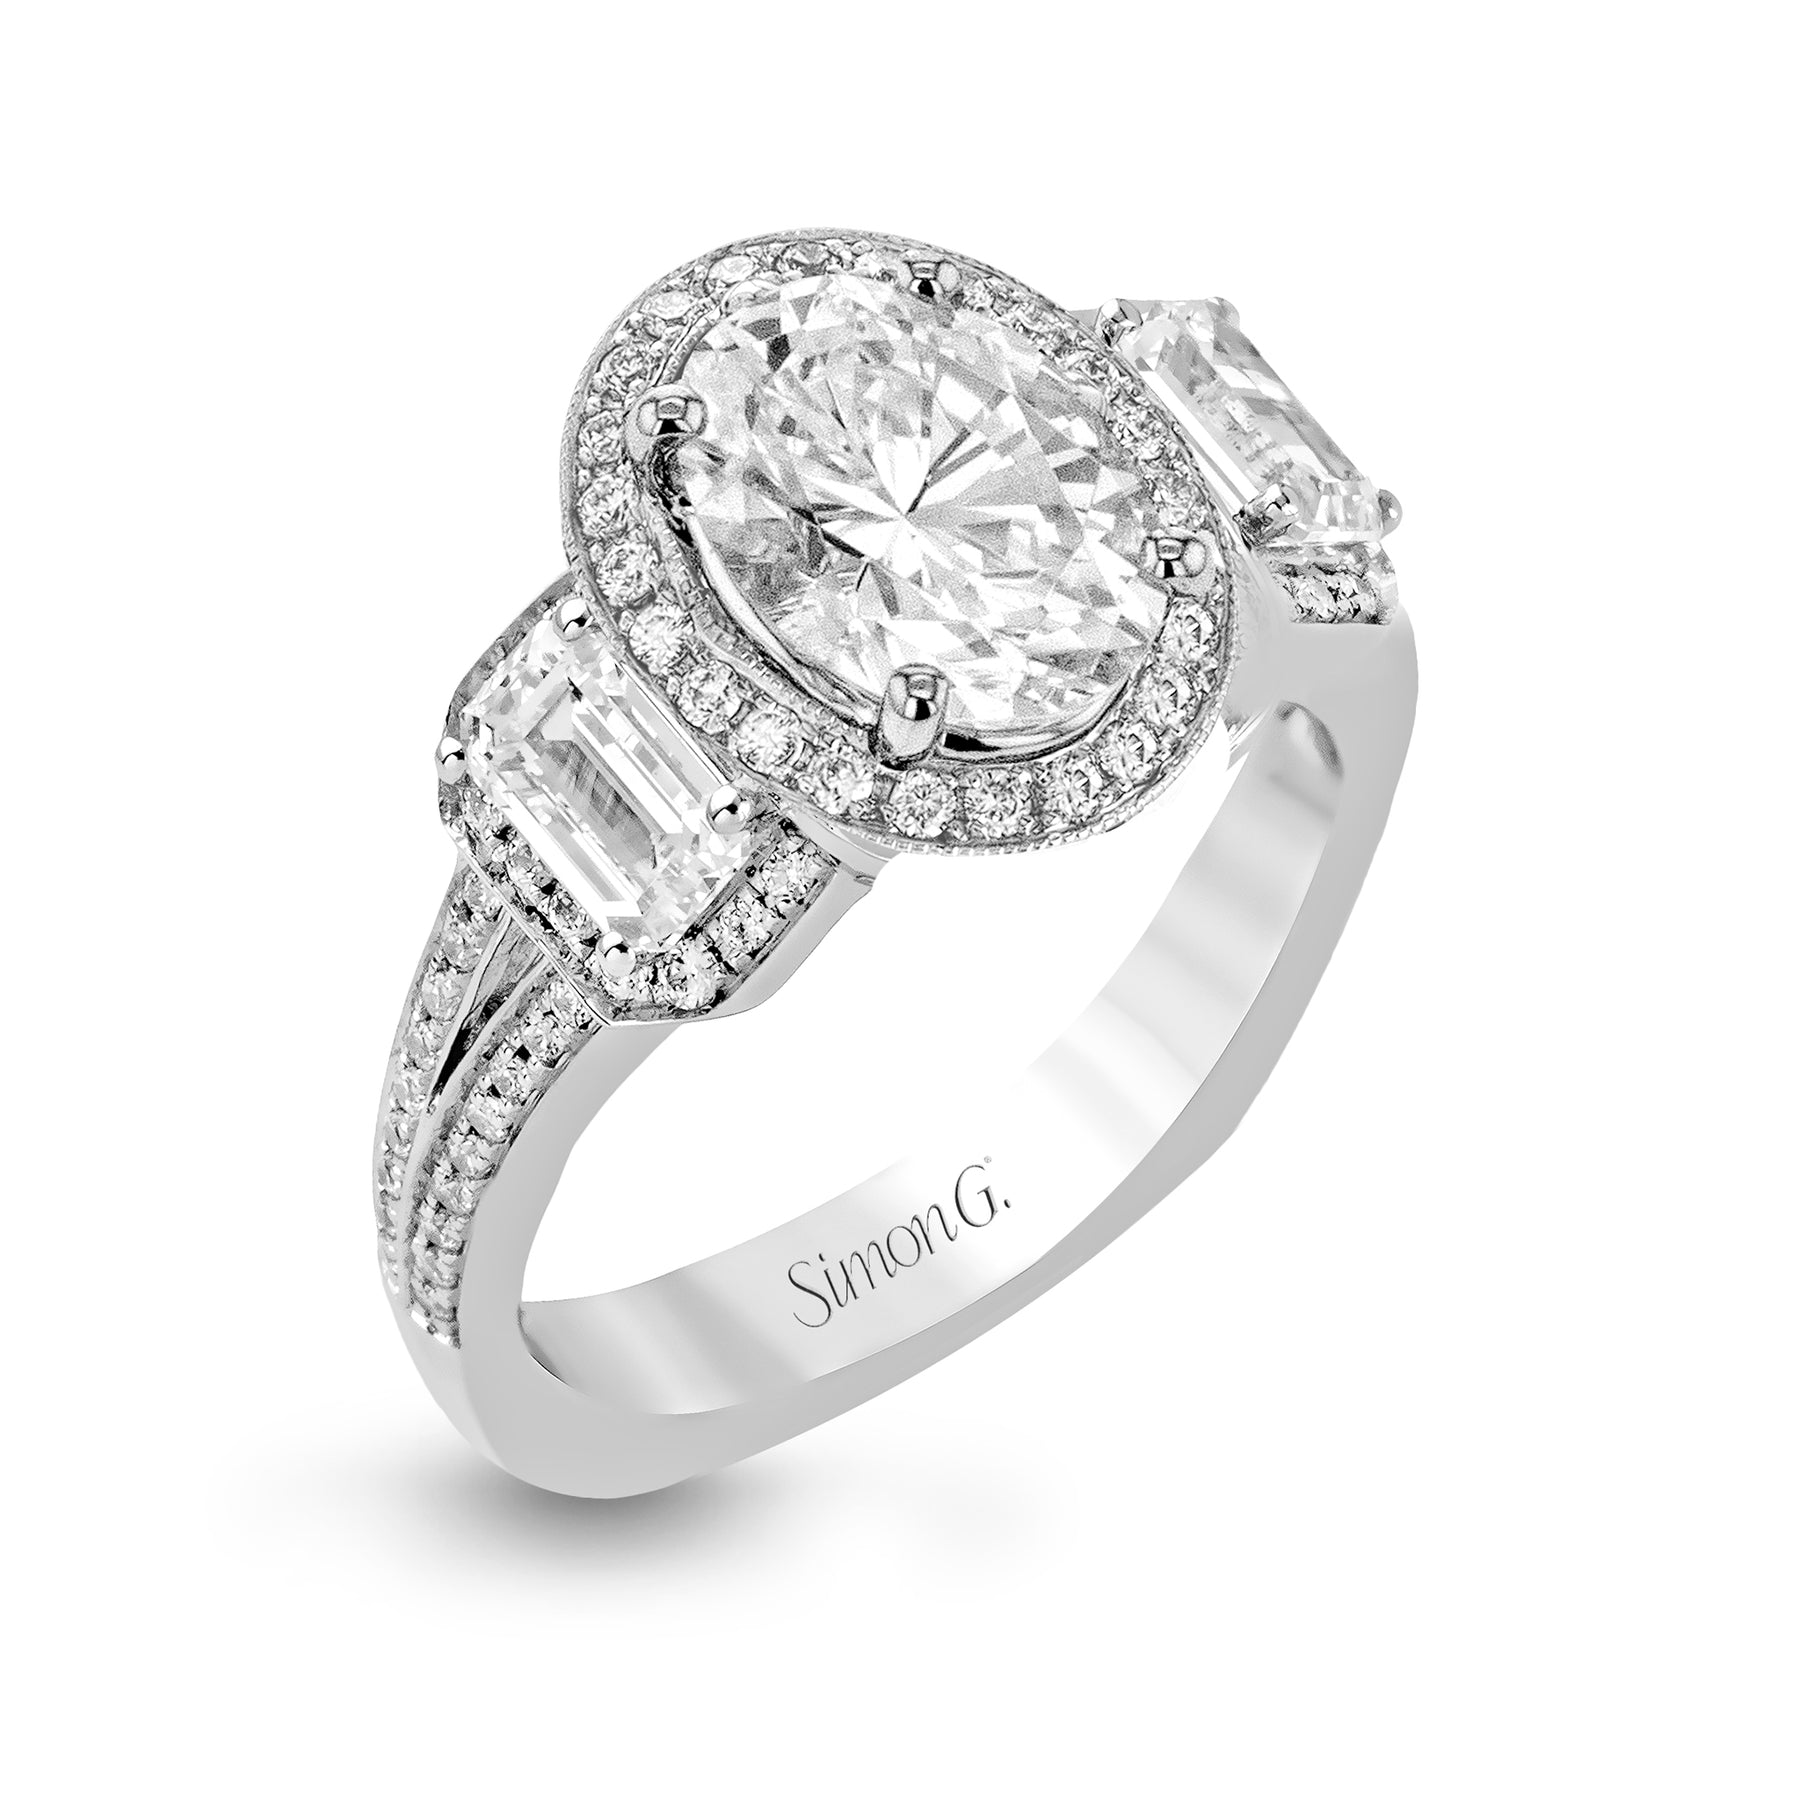 Oval-Cut Three-Stone Halo Engagement Ring In 18k Gold With Diamonds TR446-OV